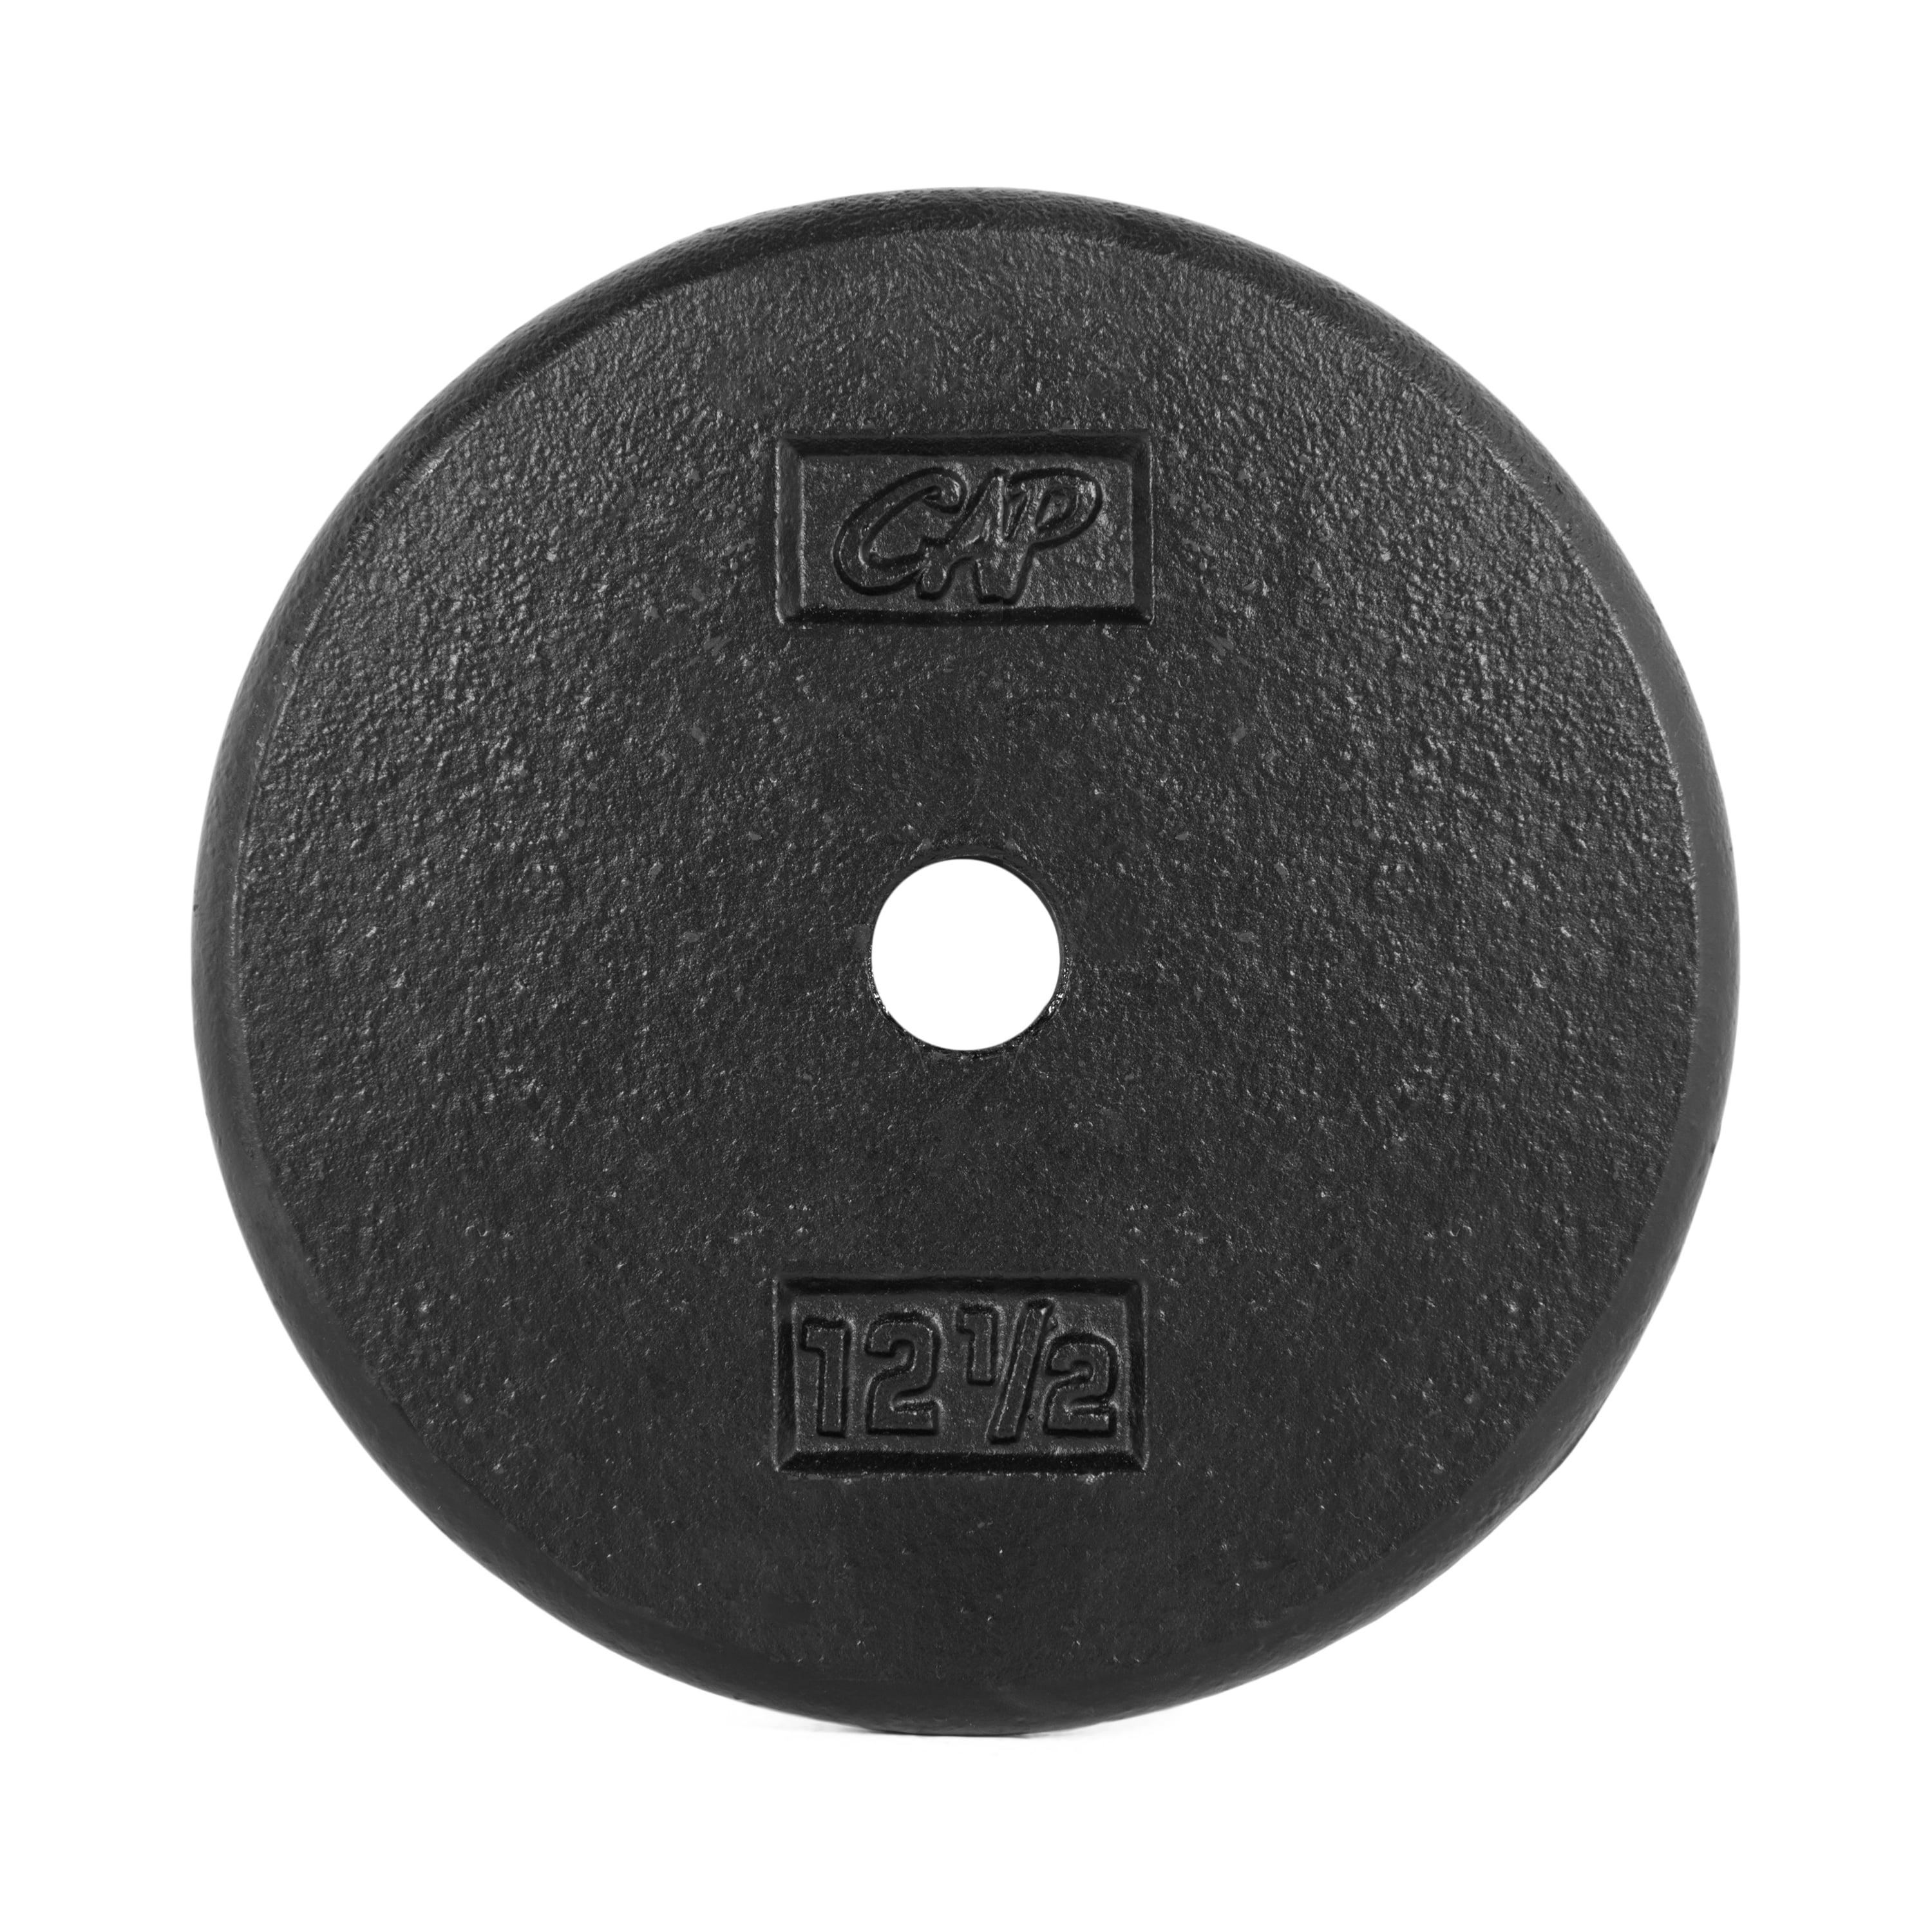 4 x 1.25kg Cast Iron Pro-Style Weight Disc Plates Standard 1 Inch hole 